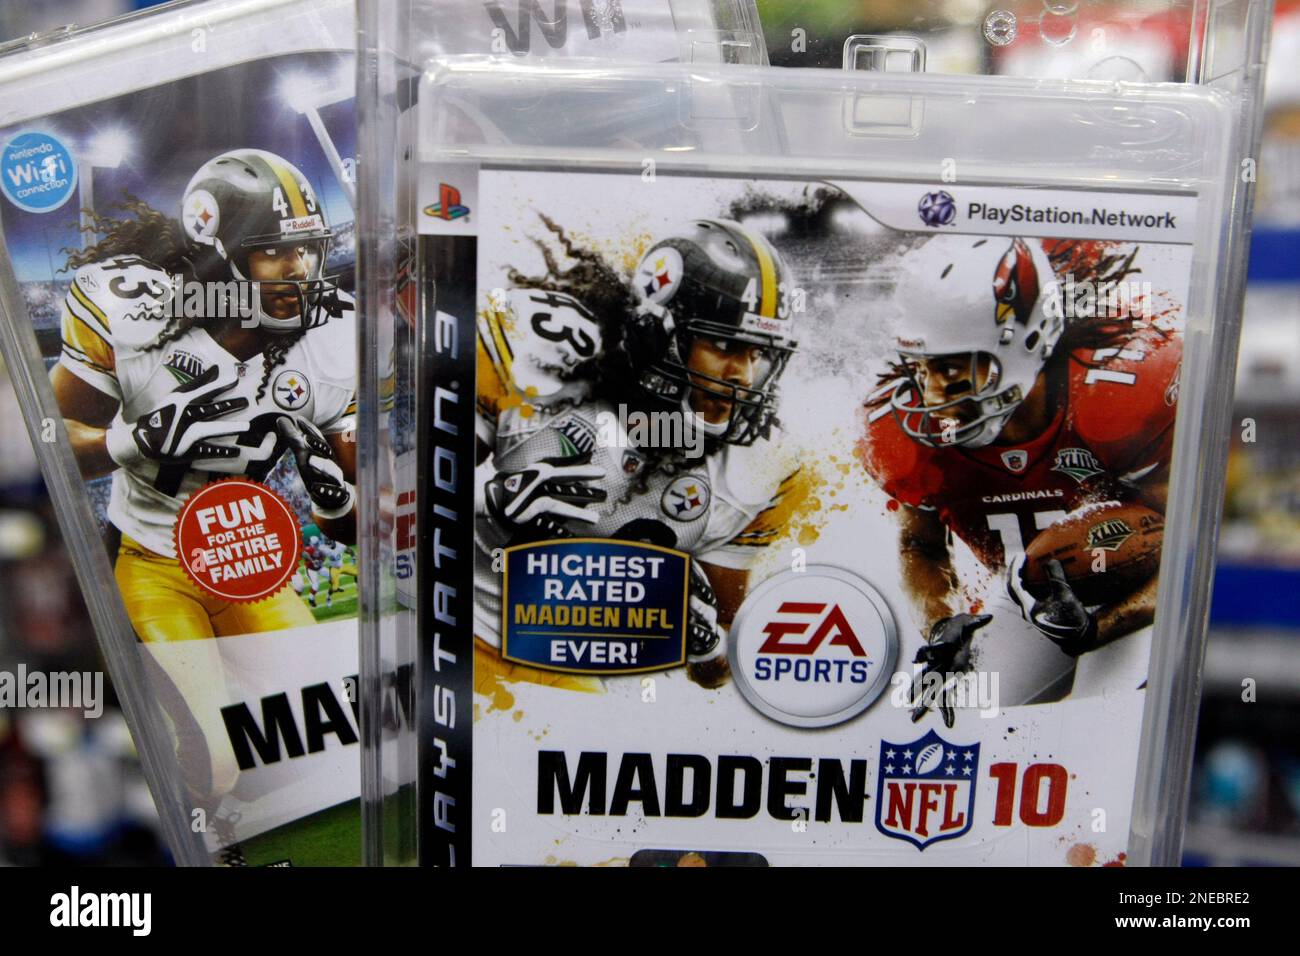 Wii and PlayStation 3 versions of Madden NFL 10, an Electronic Arts game,  are shown at Best Buy in Mountain View, Calif., Monday, Feb. 8, 2010.  Electronic Arts Inc. is showing a